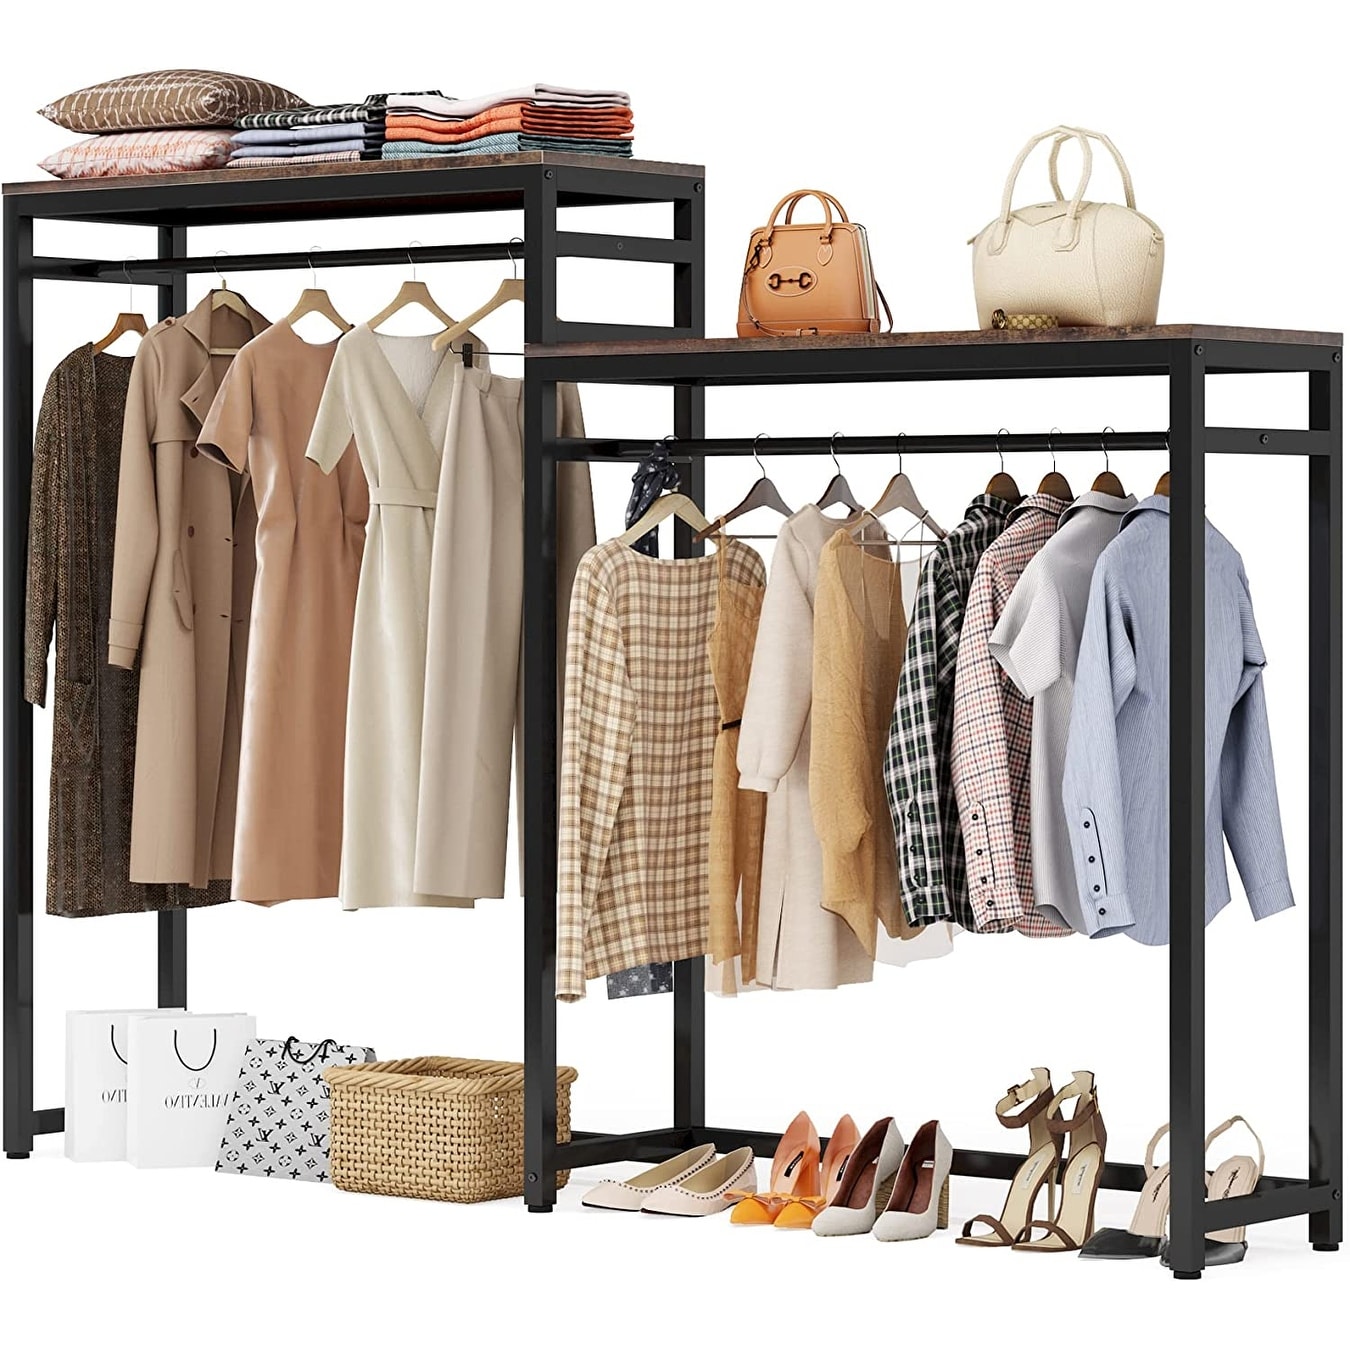 https://ak1.ostkcdn.com/images/products/is/images/direct/20f2101aa026f1a8880b862145839452fae7693b/Tribesigns-Free-Standing-Closet-Organizer%2C-Clothes-Garment-Racks-with-Storage-Shelves-and-Double-Hanging-Rod.jpg